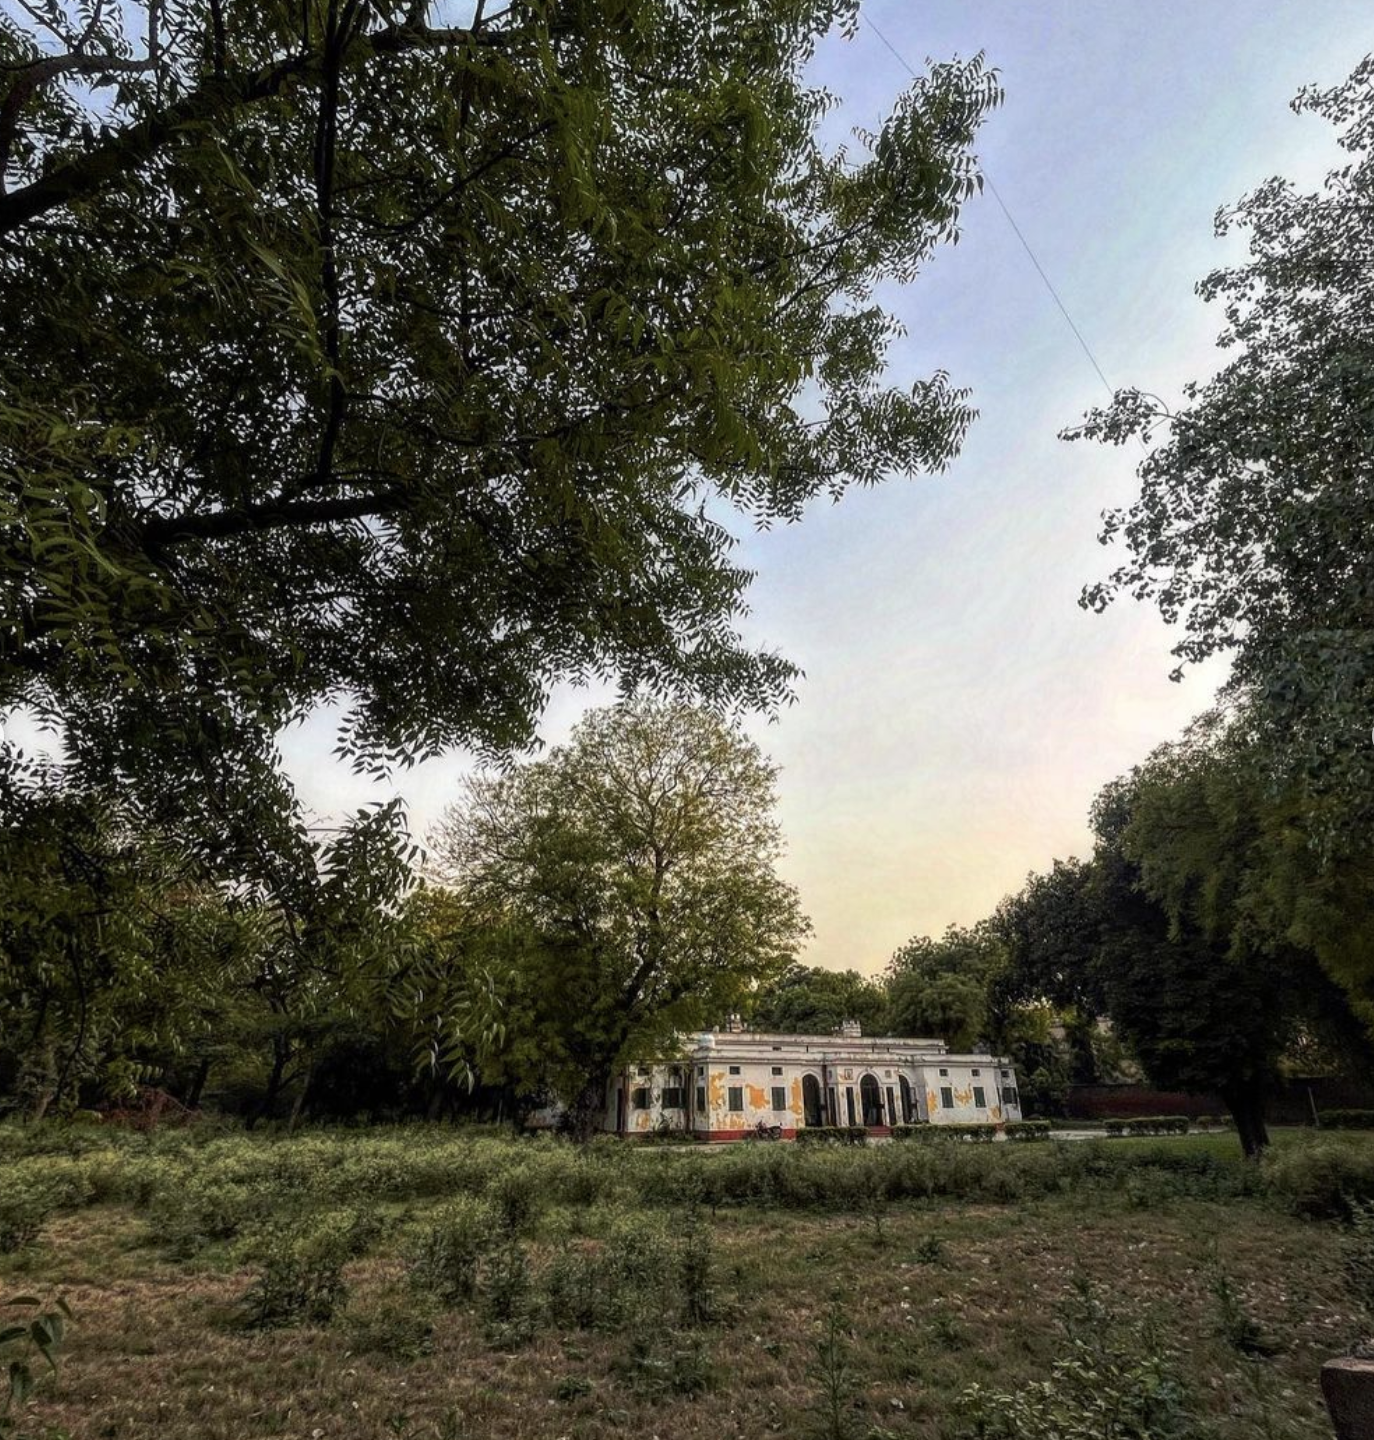 Anica Mann of Delhi Houses | A mansion house in Delhi surrounded by trees